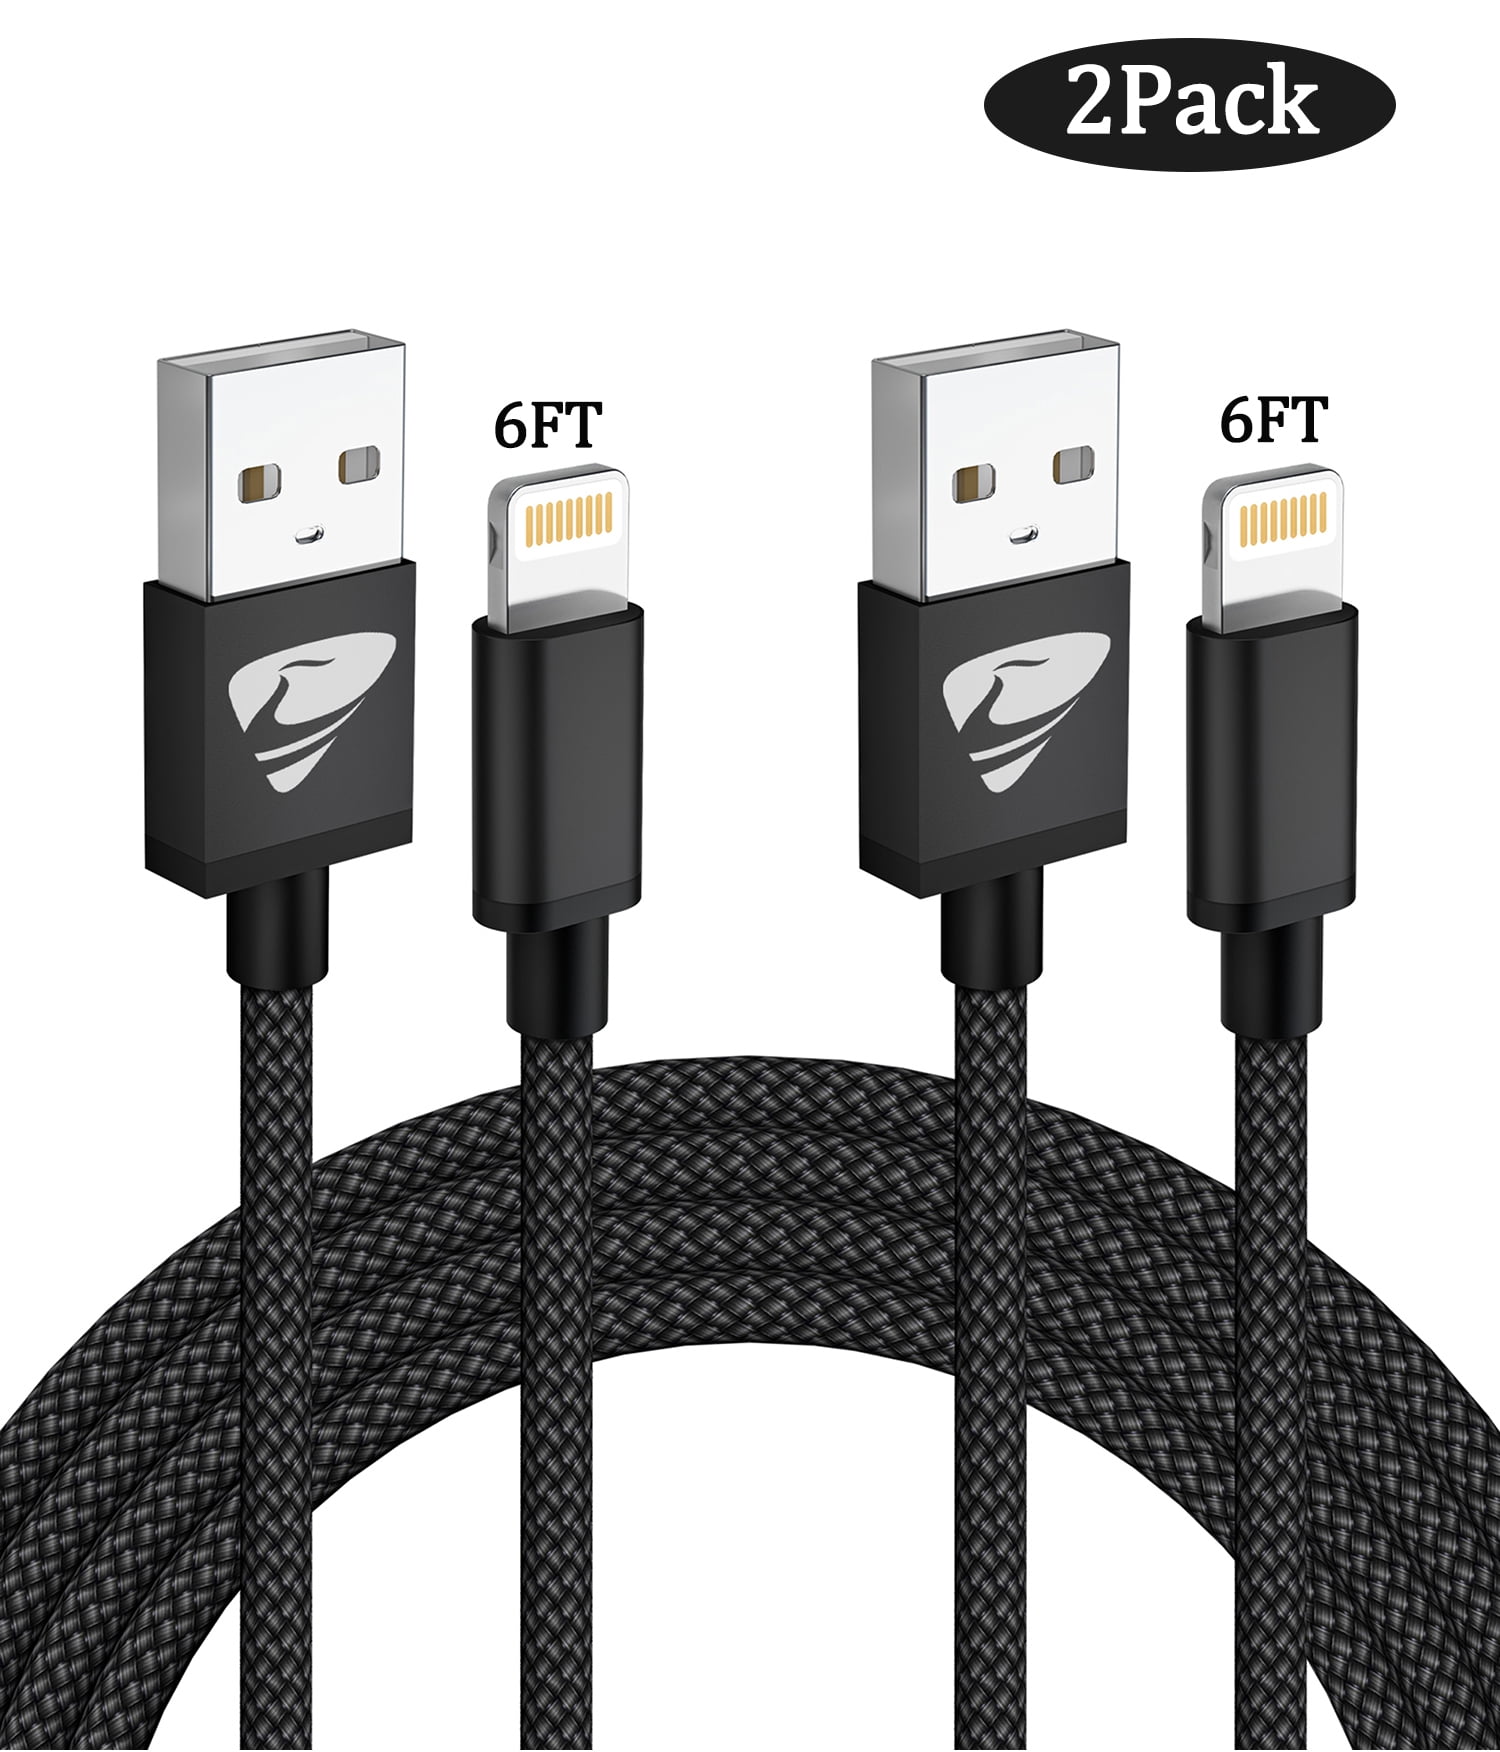 Mfi Certified Lightning Cables 4Pack 3Ft 2x6FT 10Ft to USB Syncing Data and Nylon Braided Cord Charger for iPhone XS/Max/XR/X/8/8Plus/7/7Plus/6S/Plus/SE/iPad and More iPhone Charger 